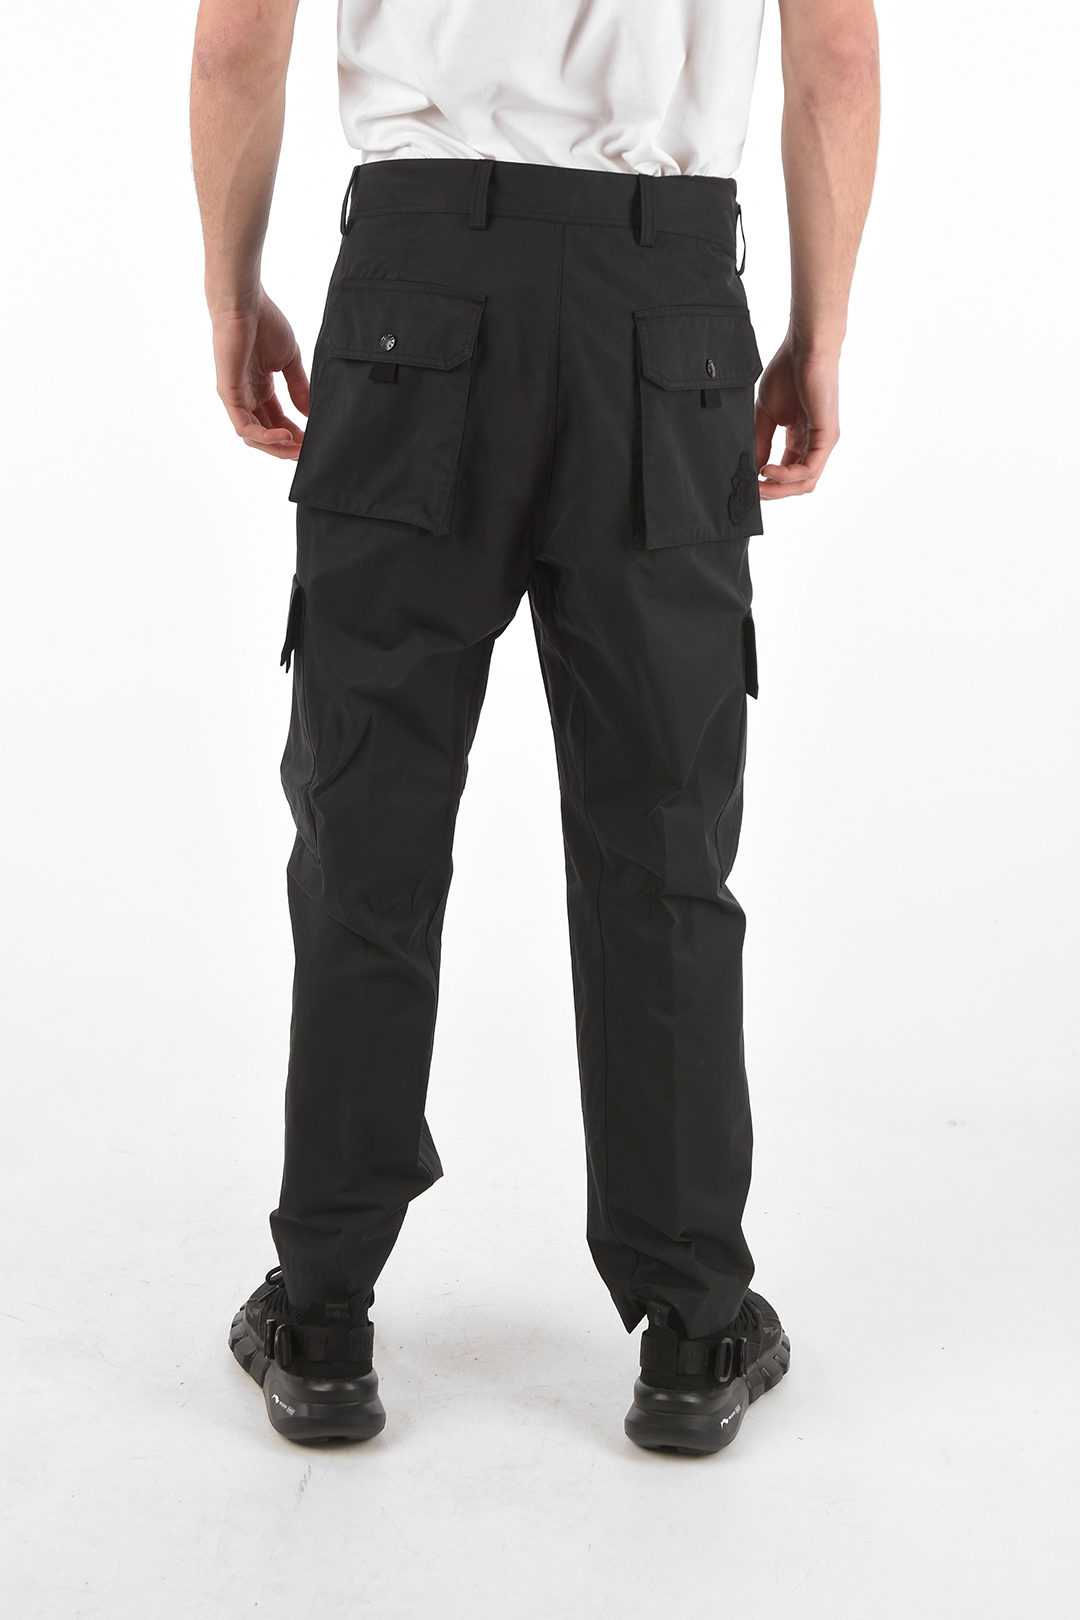 Moncler Half-lined Cargo Pants with Drawstring and Buttoning unisex men ...